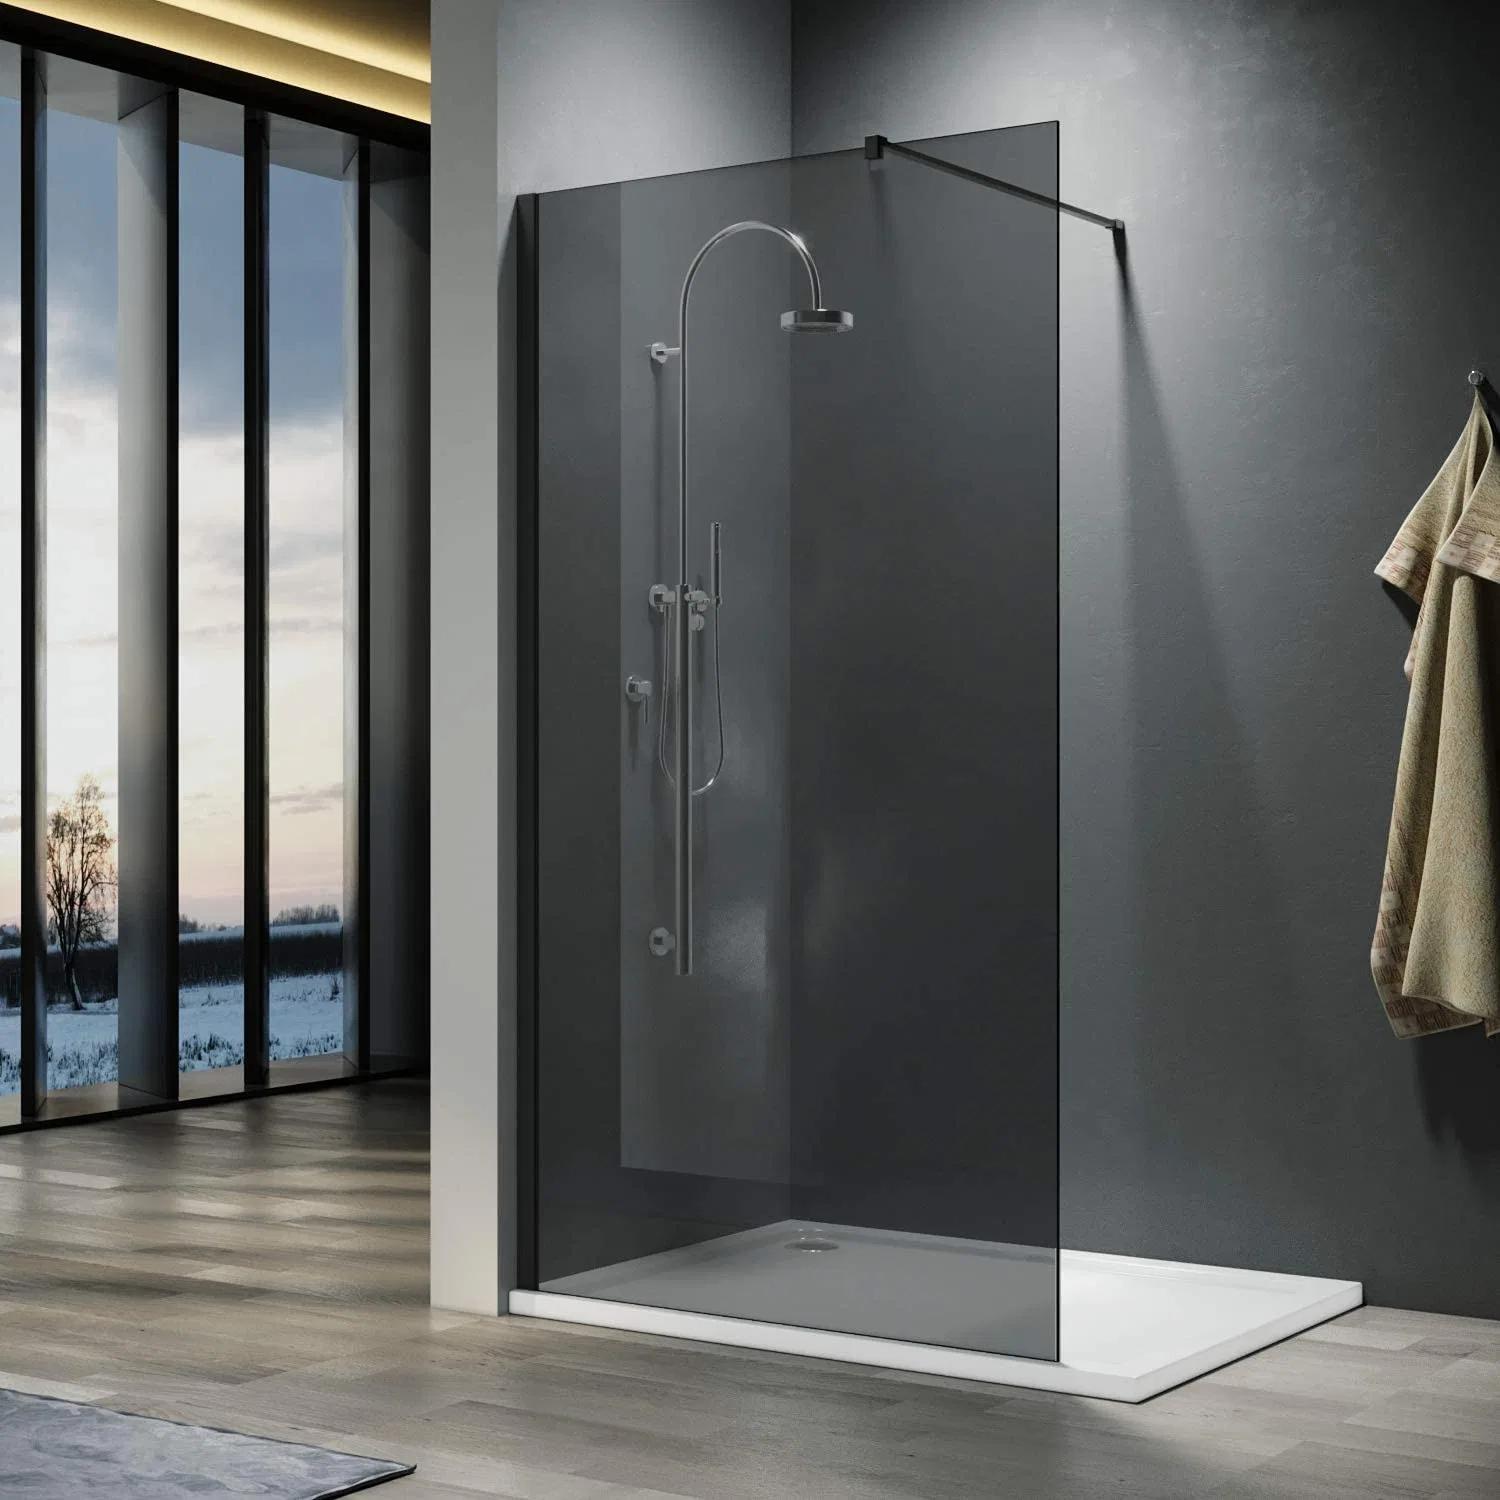 smoked glass bath shower screen - Is tempered glass shower screen safe